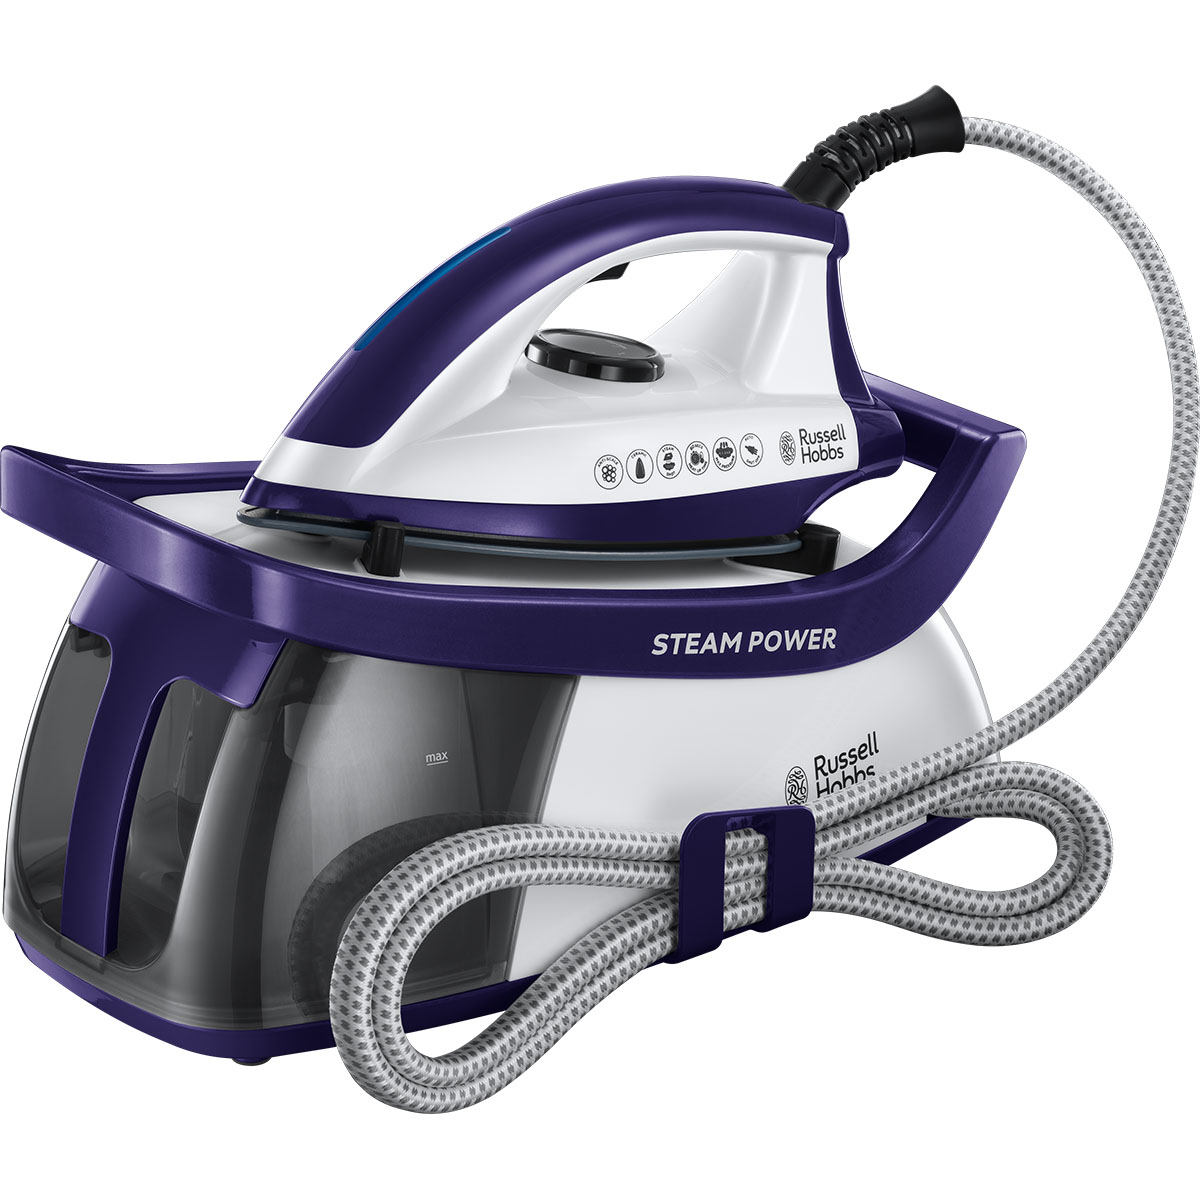 Russell Hobbs 24440 SteamPower Series 3 1.3L Steam Generator - Purple and White